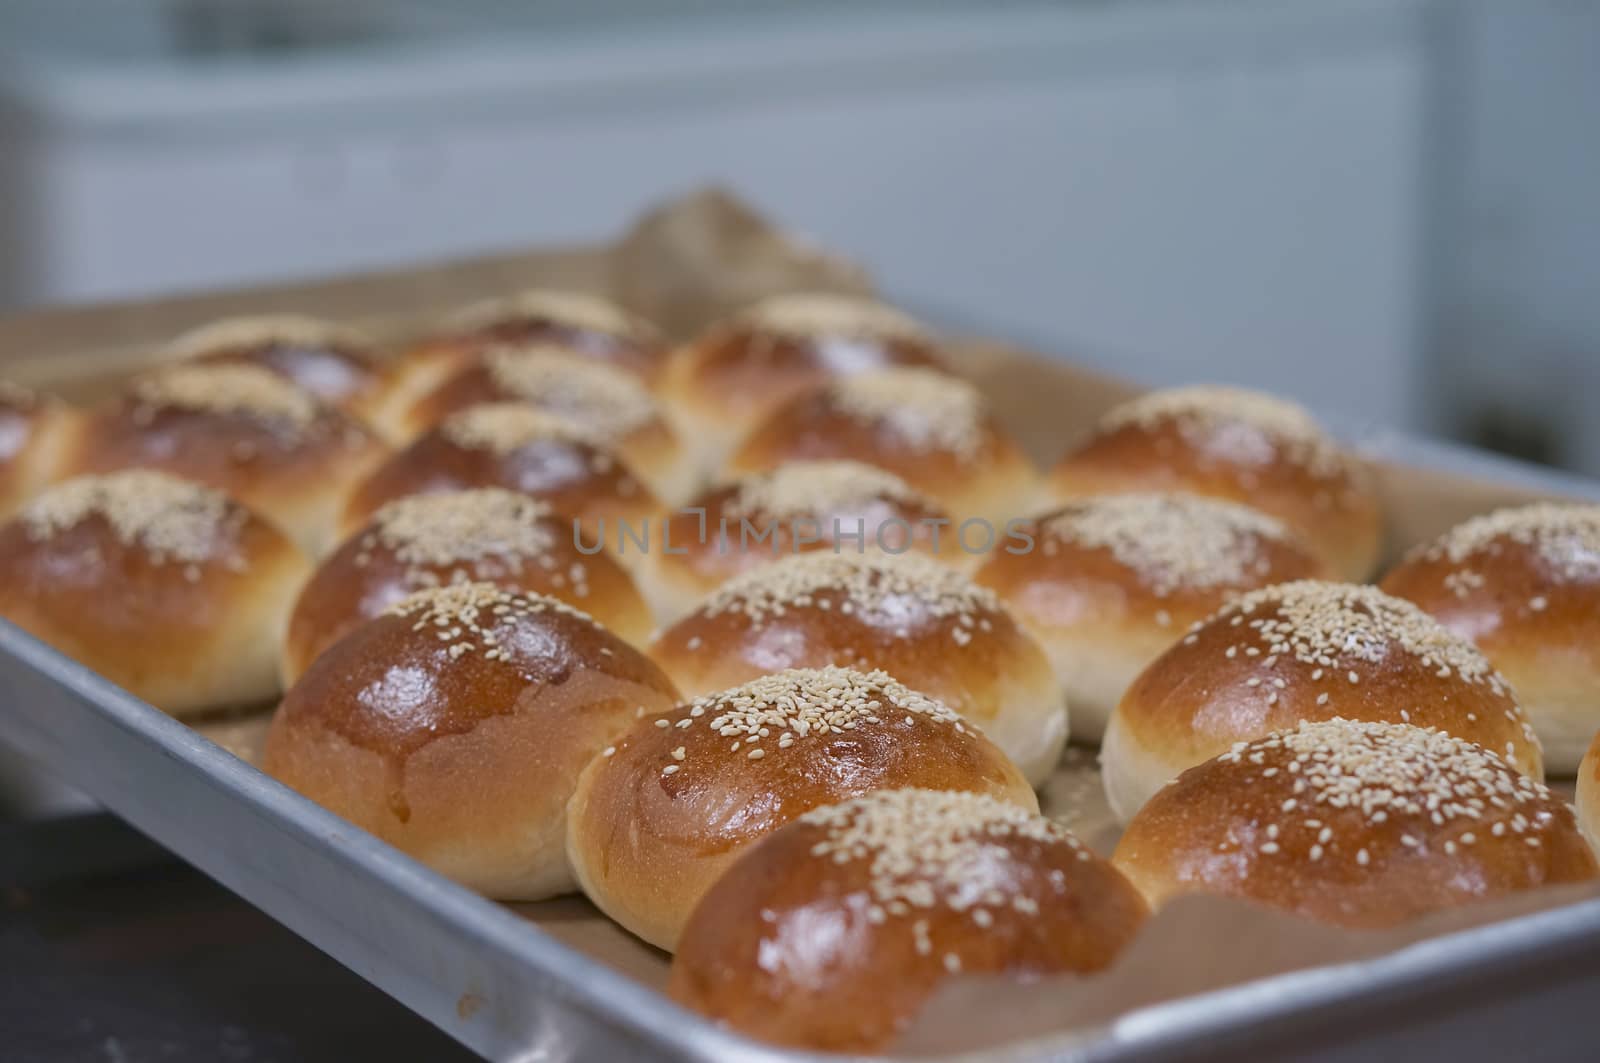 Dessert bread on top with sesame on stainless tray in kitchens.